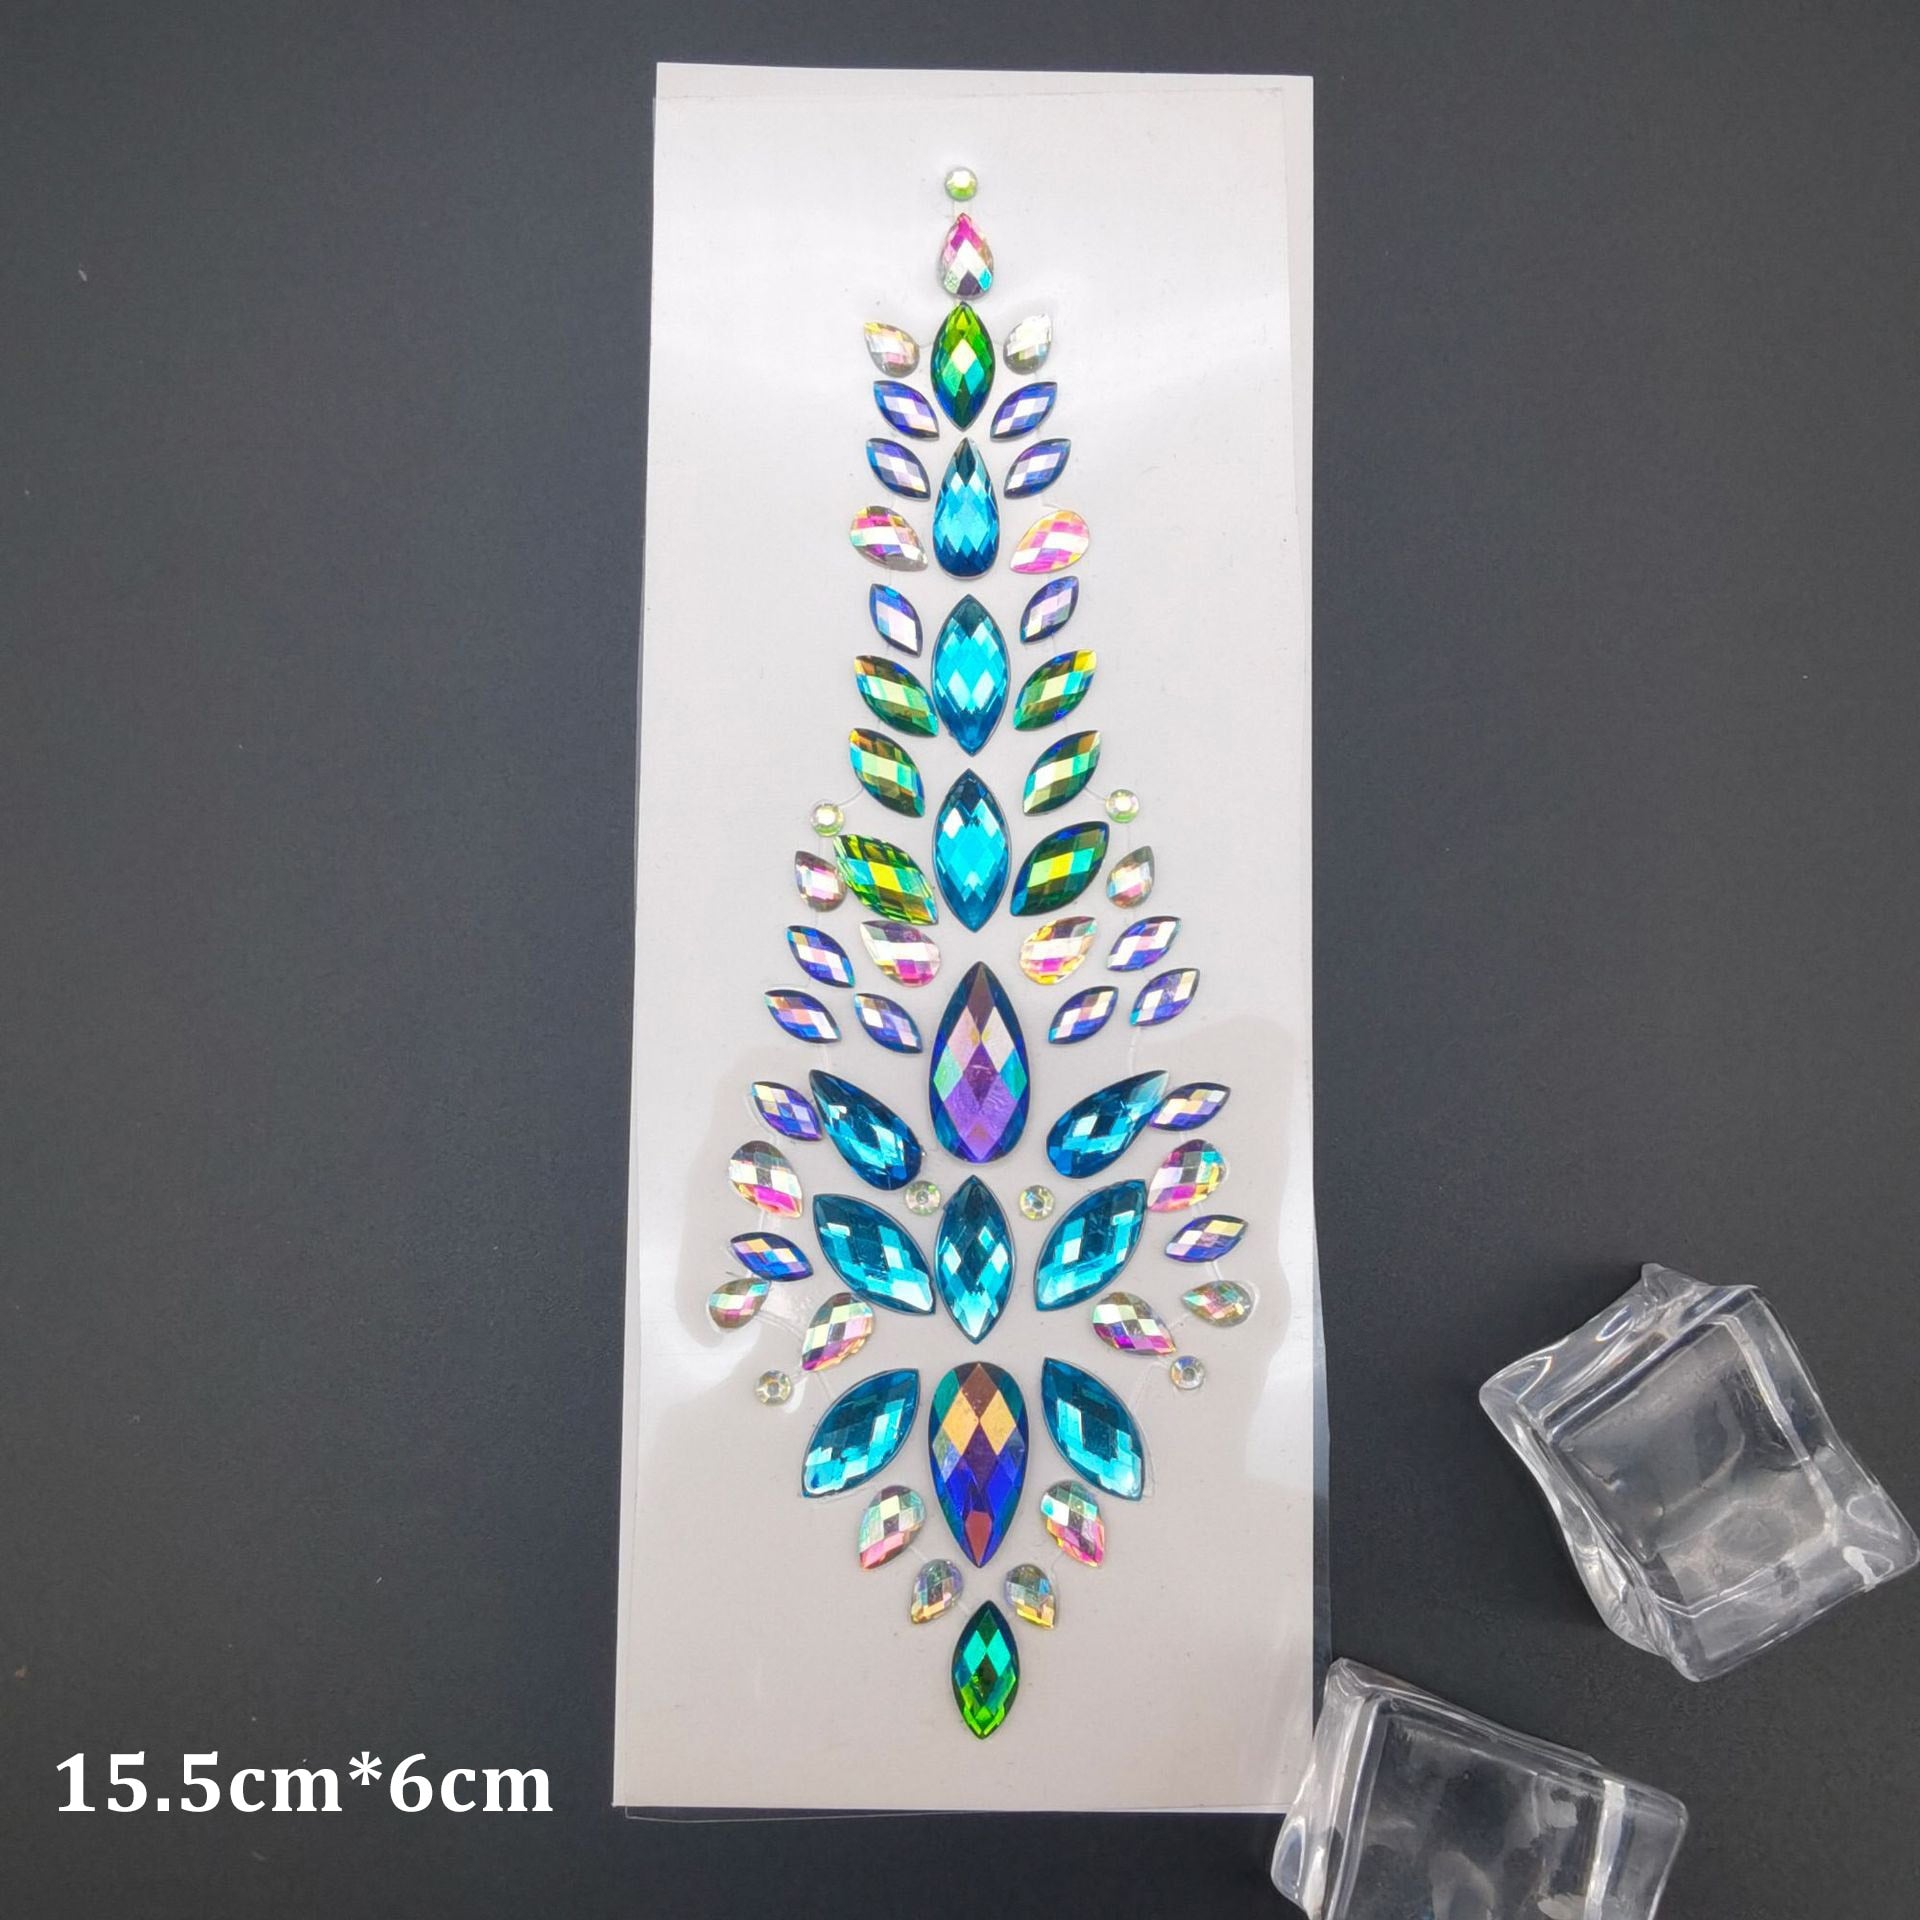 EDM 3D Crystal Stickers